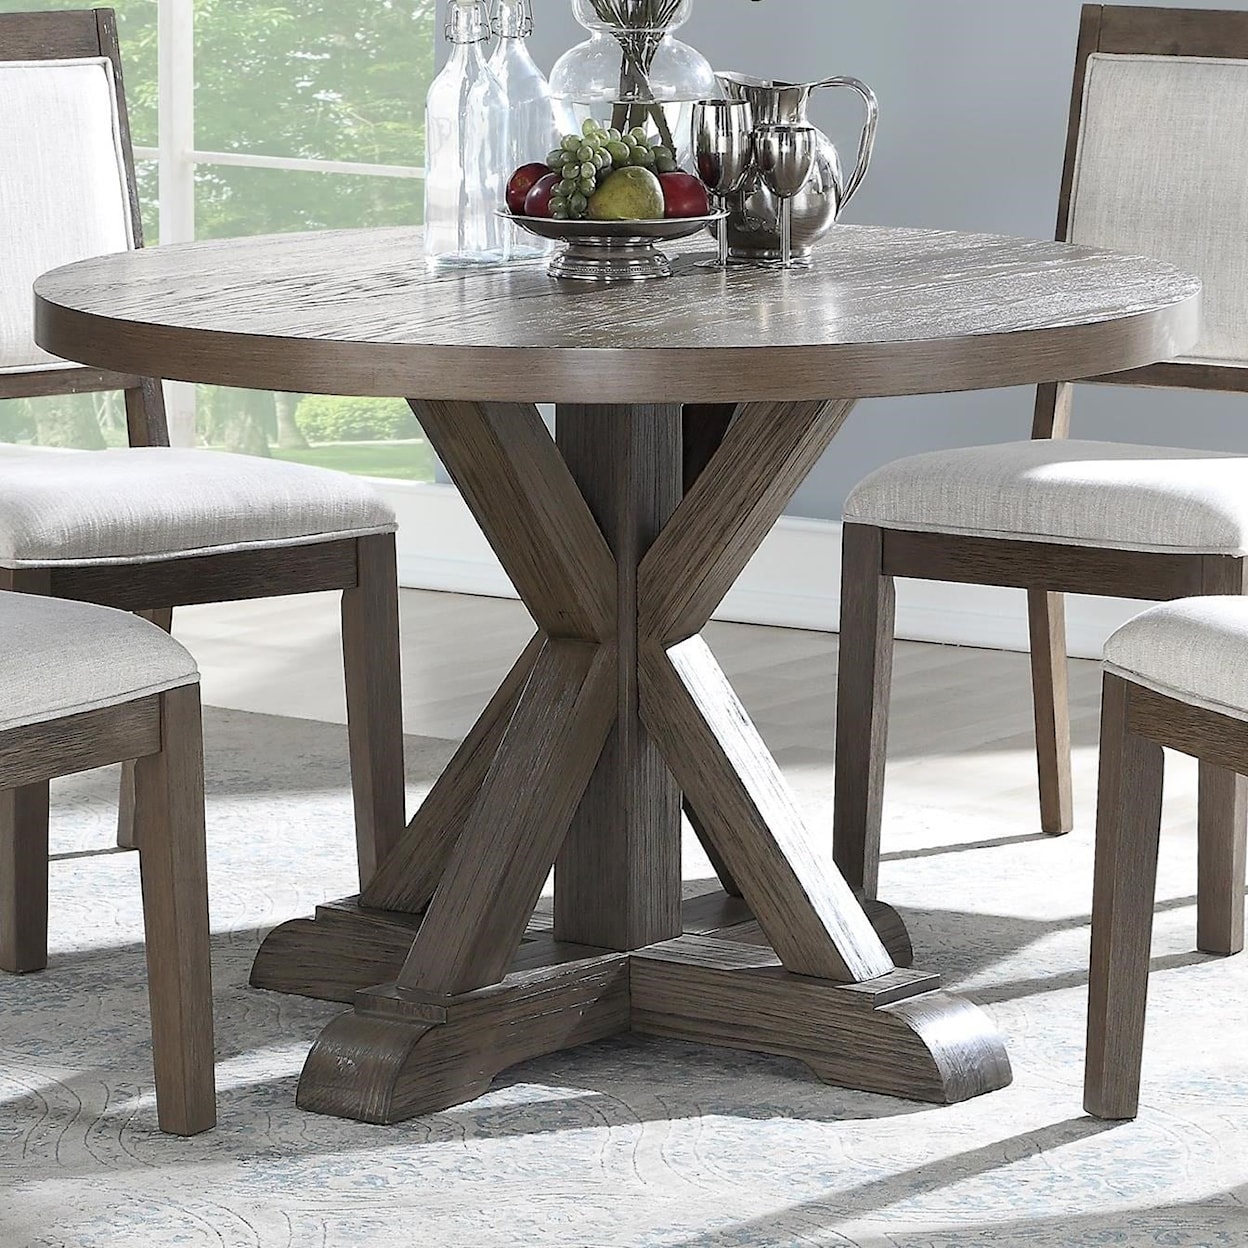 Steve Silver Wisteria Wisteria Round Dining Table